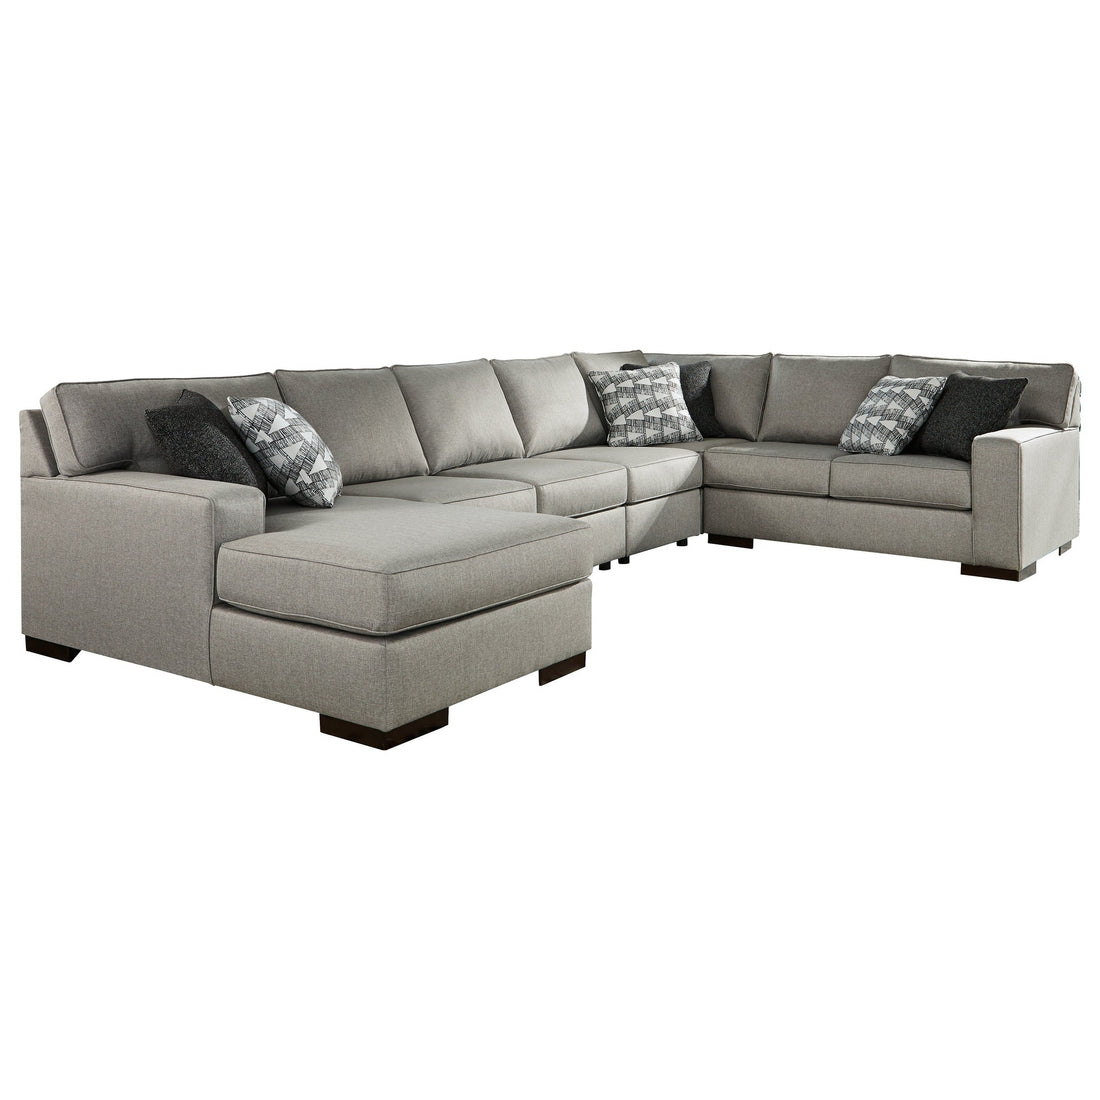 Marsing Nuvella 5-Piece Sleeper Sectional with Chaise Ash-41902S11